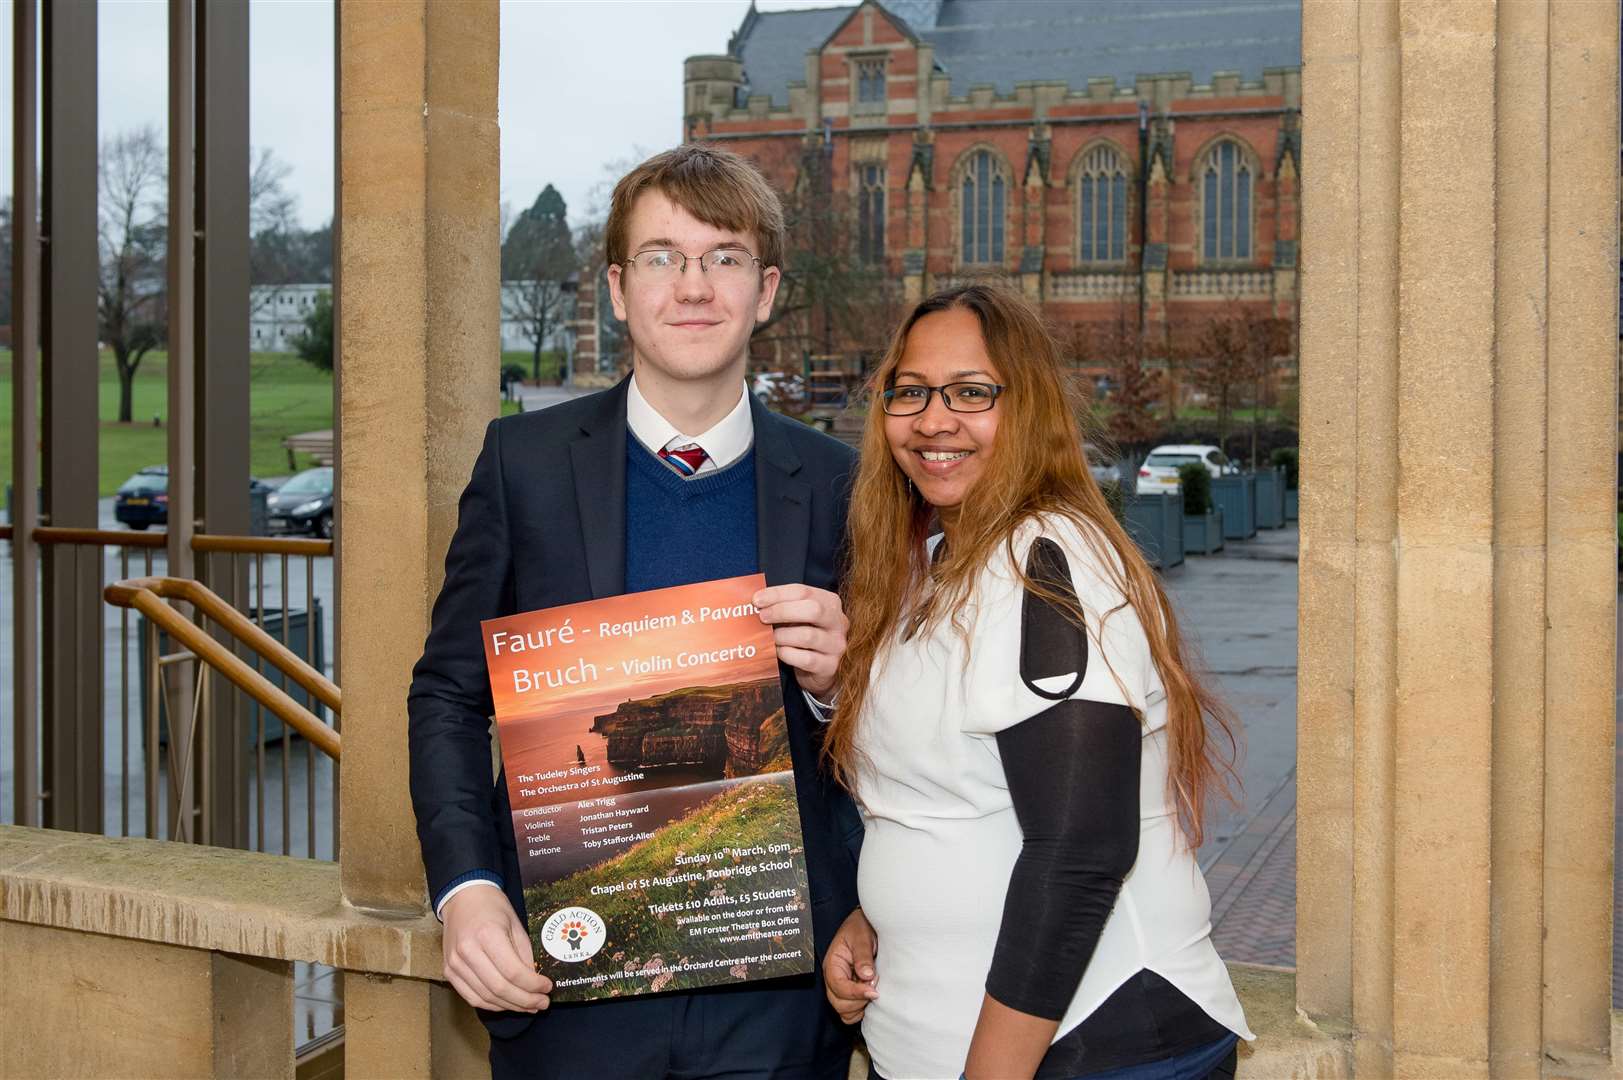 Alex is pictured with Debbie Edirisinghe, the director of Child Action Lanka, the charity that he is supporting